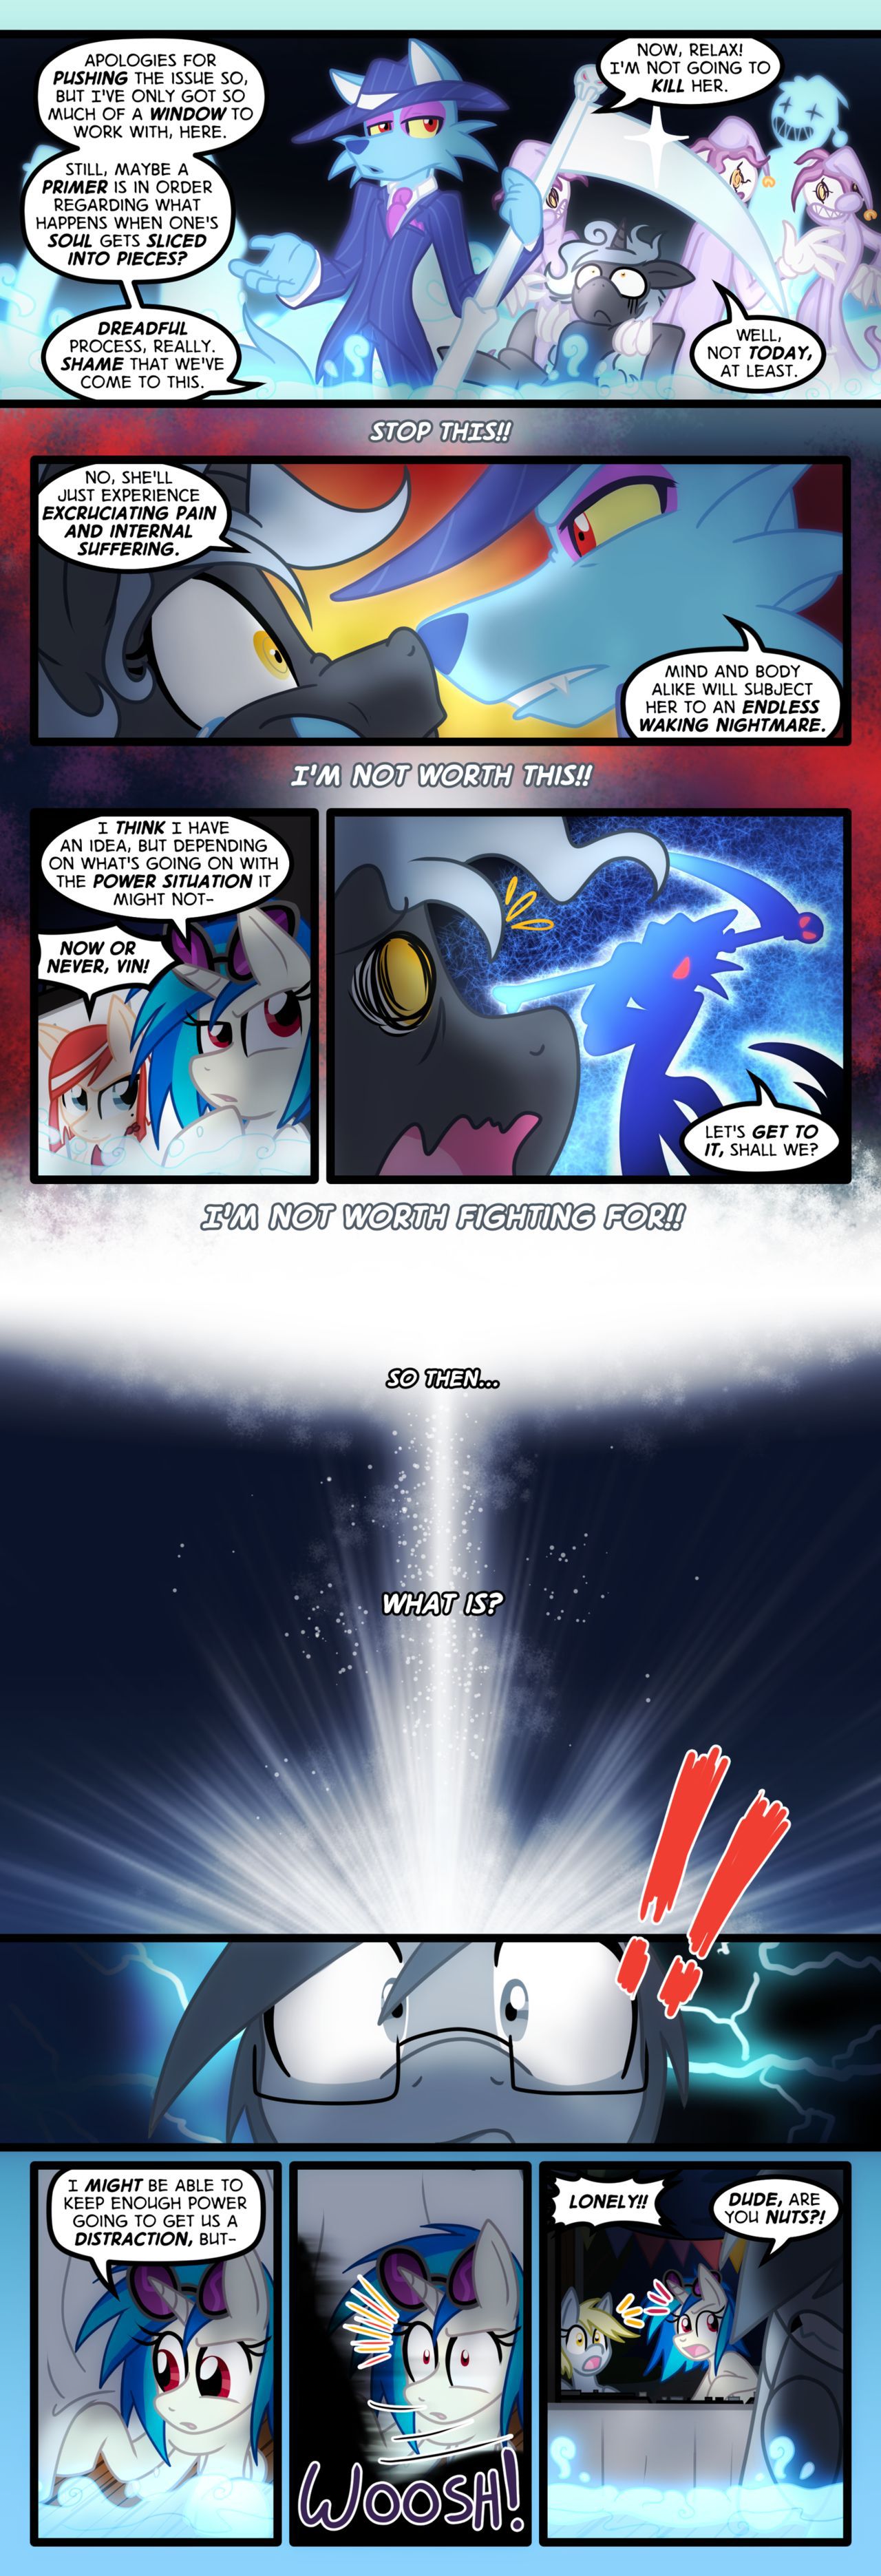 [Zaron] Lonely Hooves (My Little Pony Friendship Is Magic) [Ongoing] 124